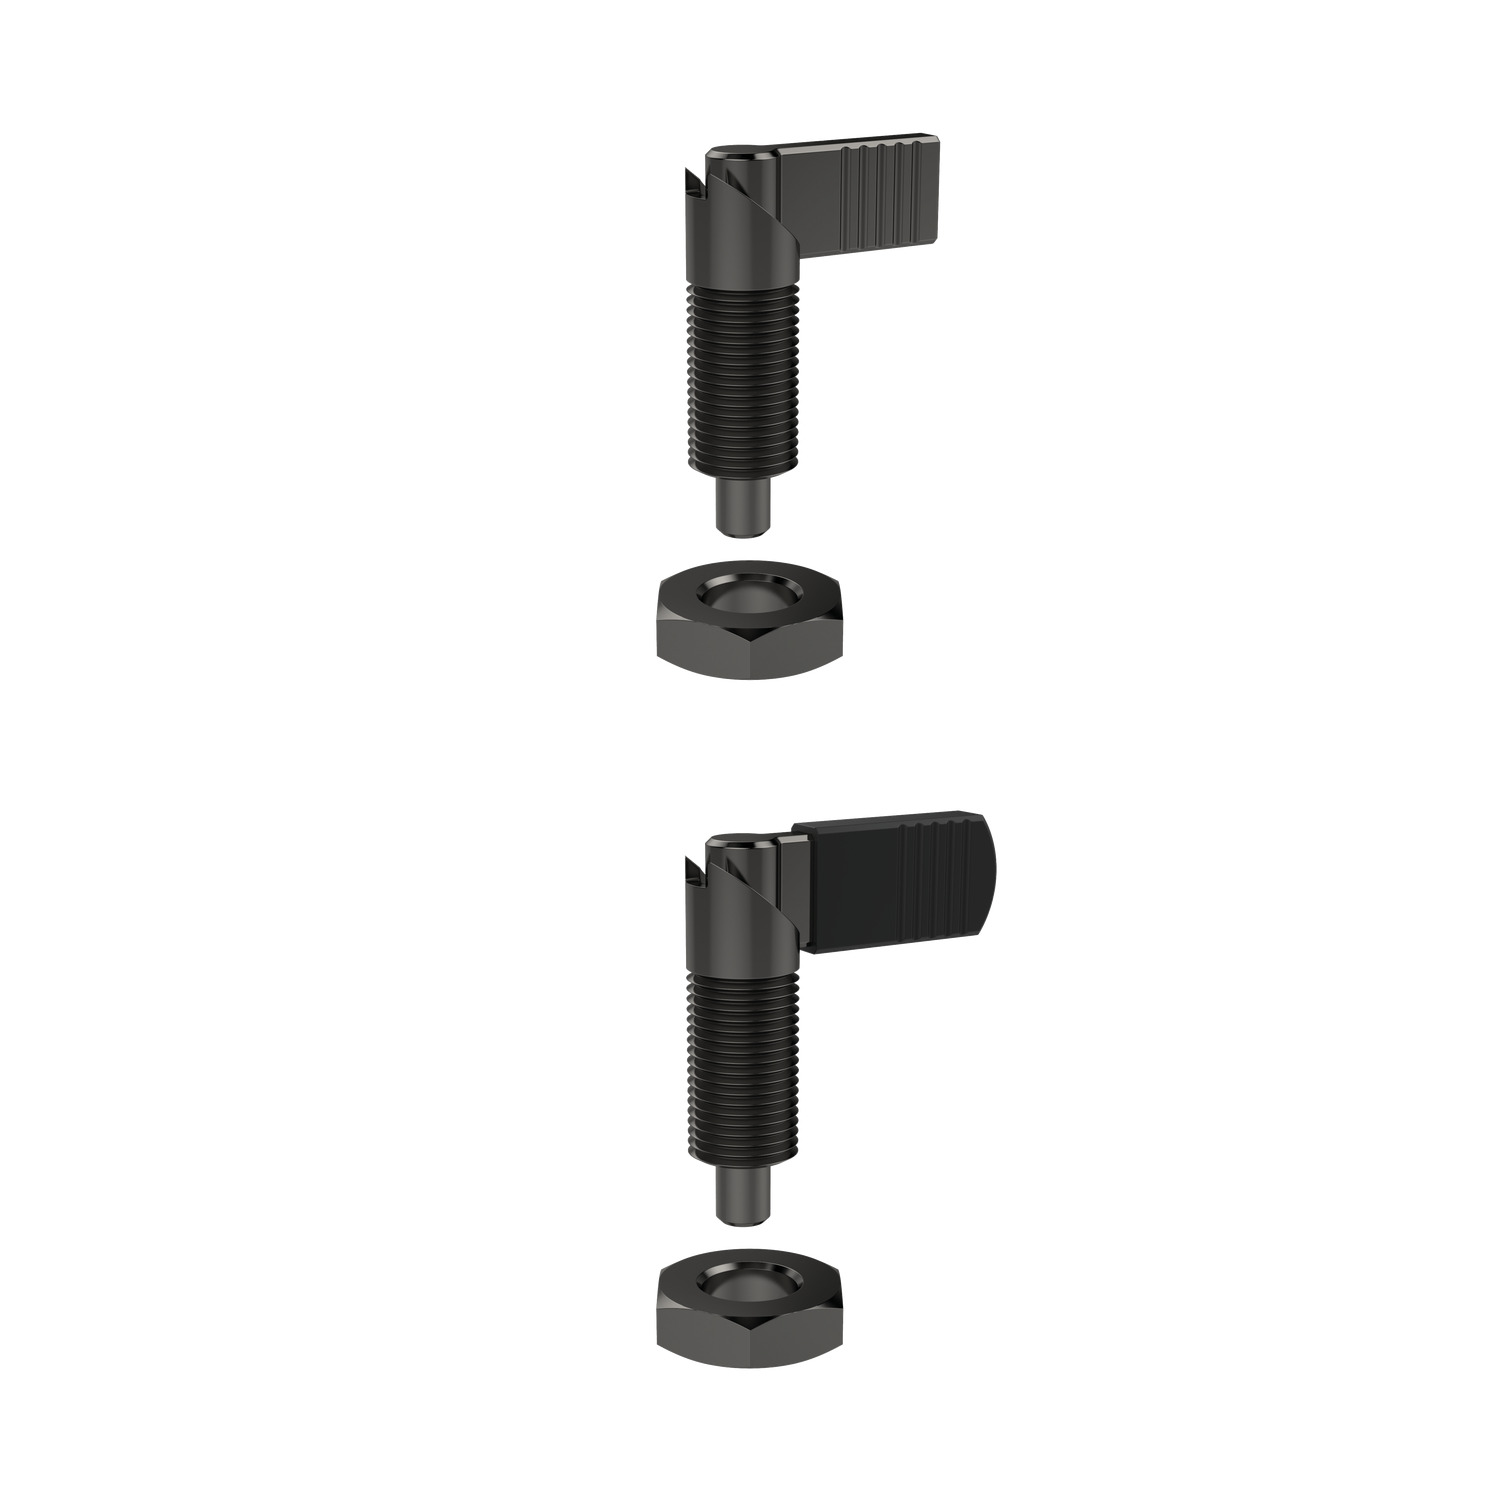 Index Plungers - Lever Grip Lever grip index plungers with locking. Turn lever 180º to retract pin. To enable pin to be held in retracted position, secure lever in notched catch on plunger body.